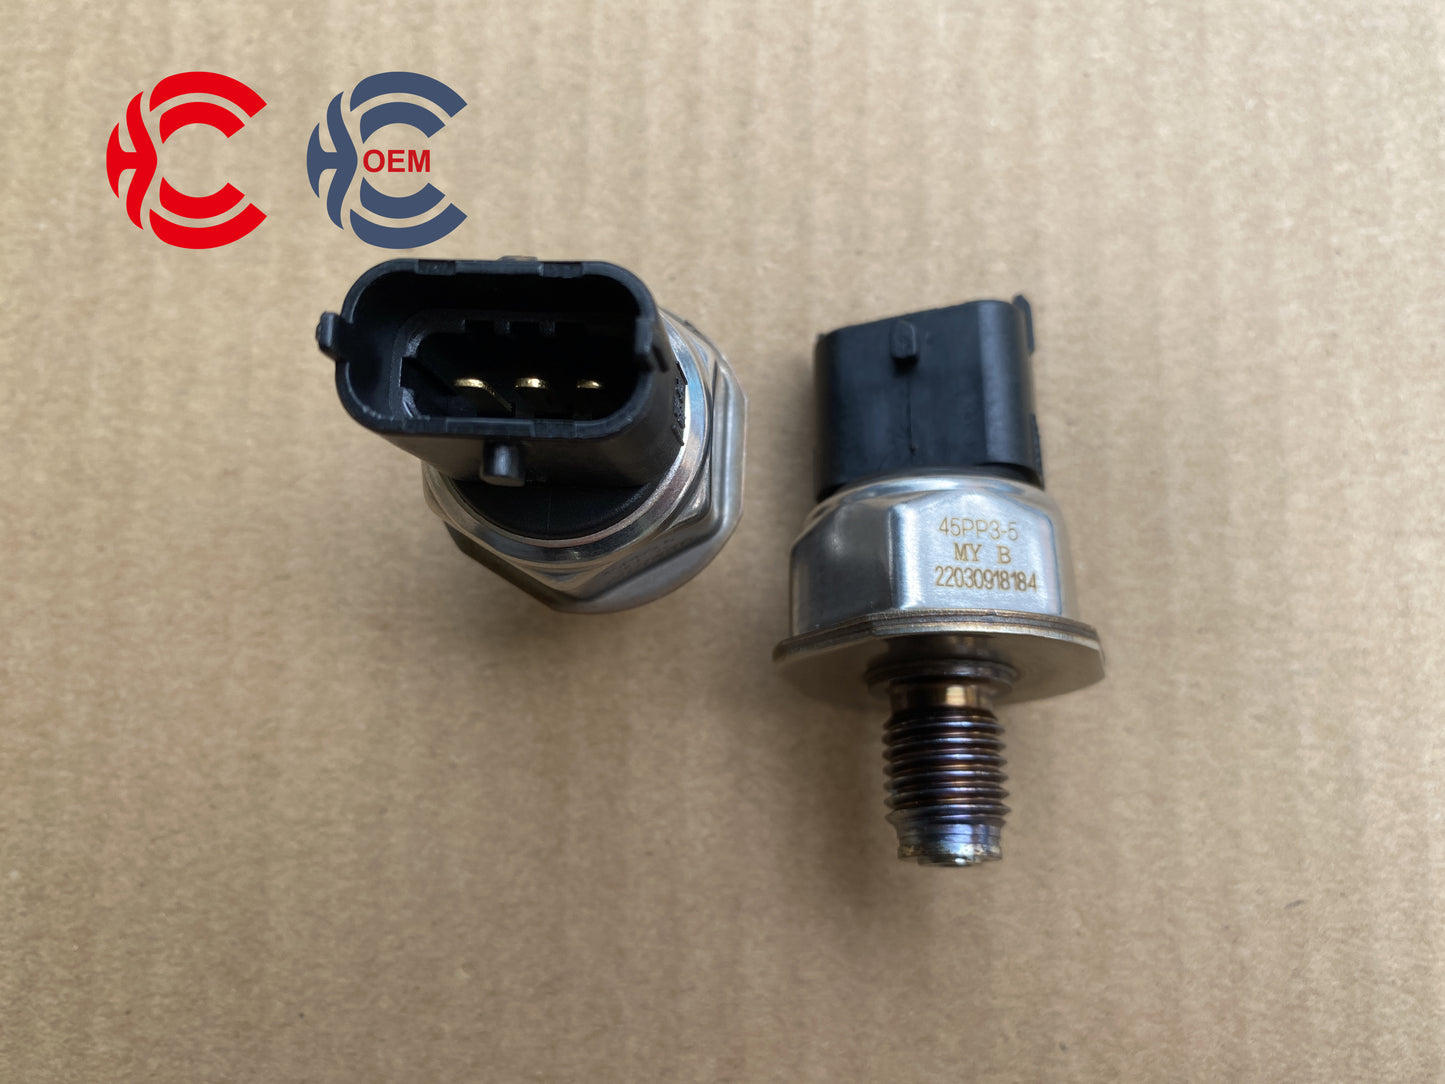 OEM: 45PP3-5Material: ABS metalColor: black silverOrigin: Made in ChinaWeight: 100gPacking List: 1* Fuel Pressure Sensor More ServiceWe can provide OEM Manufacturing serviceWe can Be your one-step solution for Auto PartsWe can provide technical scheme for you Feel Free to Contact Us, We will get back to you as soon as possible.